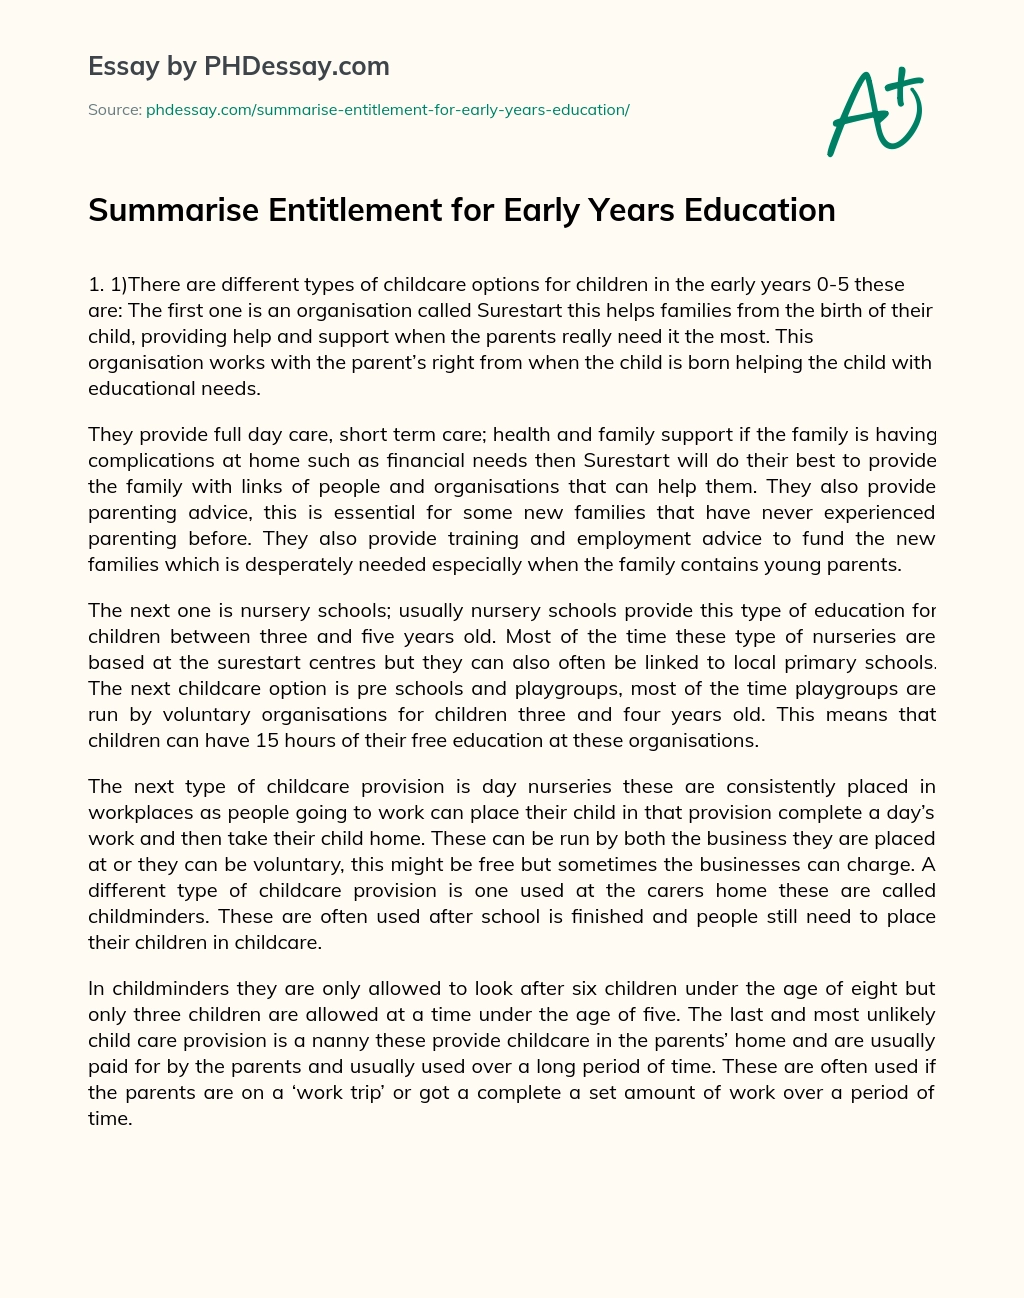 Summarise Entitlement for Early Years Education essay